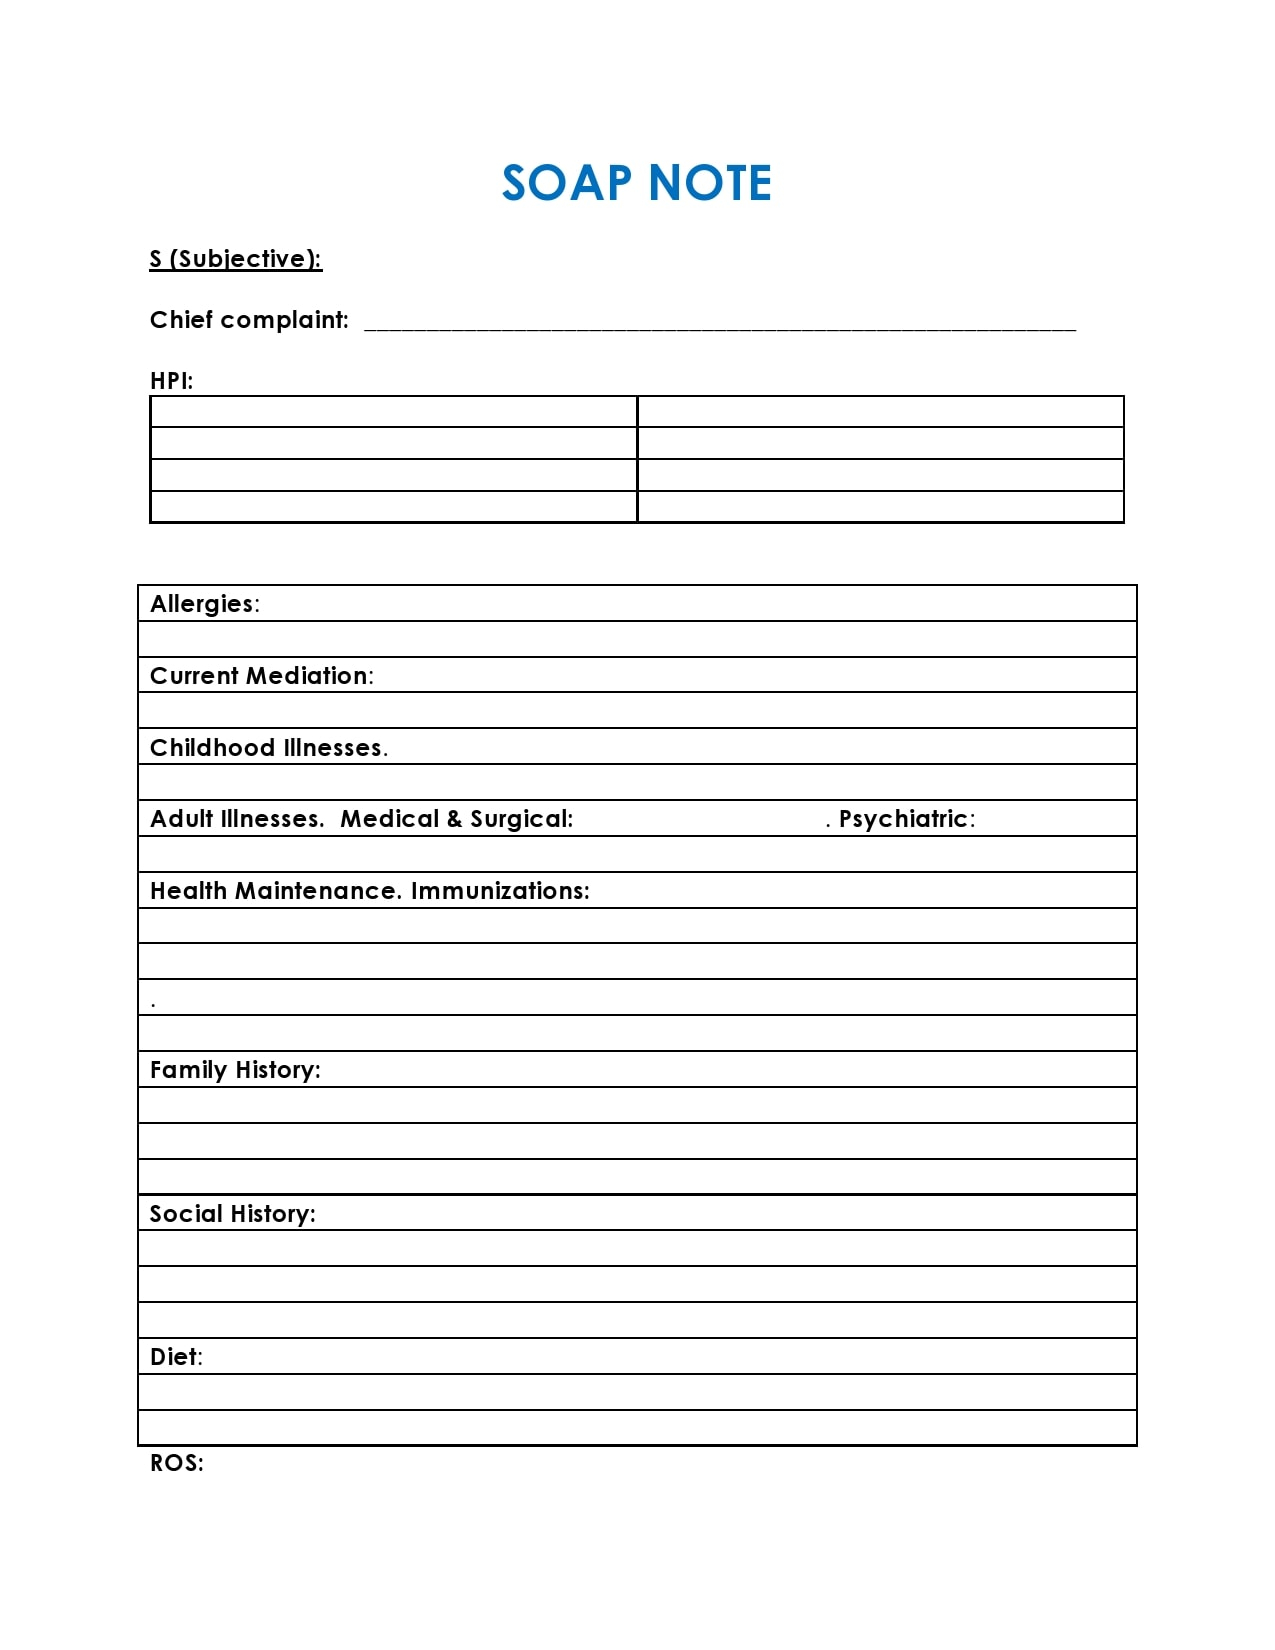 10 Blank SOAP Note Templates (+Examples) - TemplateArchive Intended For Blank Soap Note Template